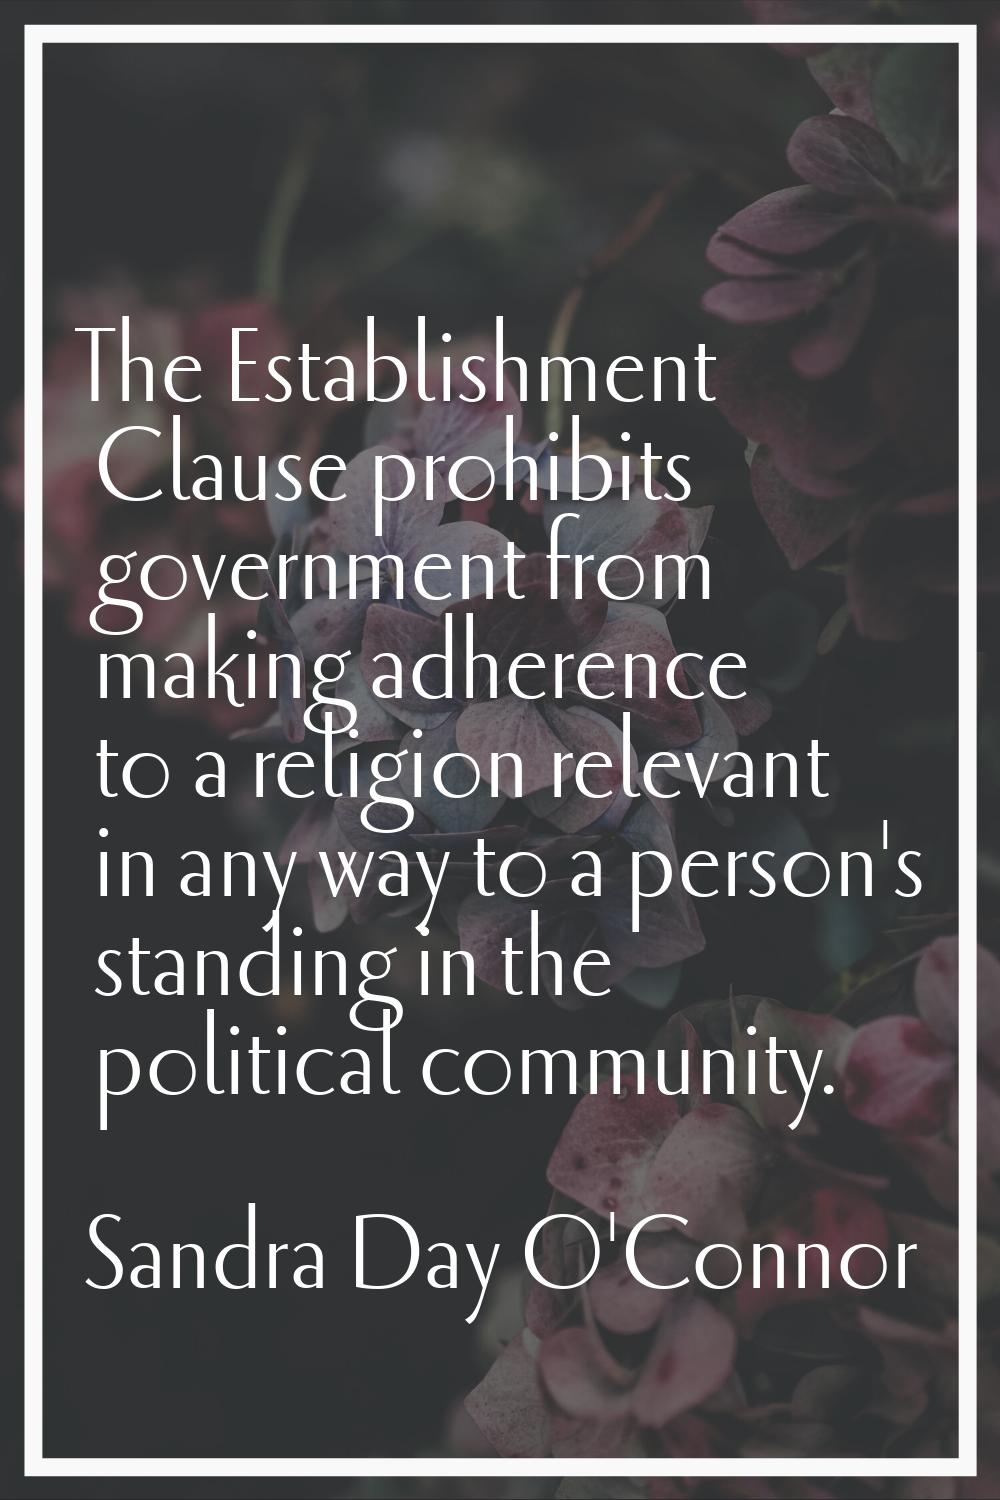 The Establishment Clause prohibits government from making adherence to a religion relevant in any w